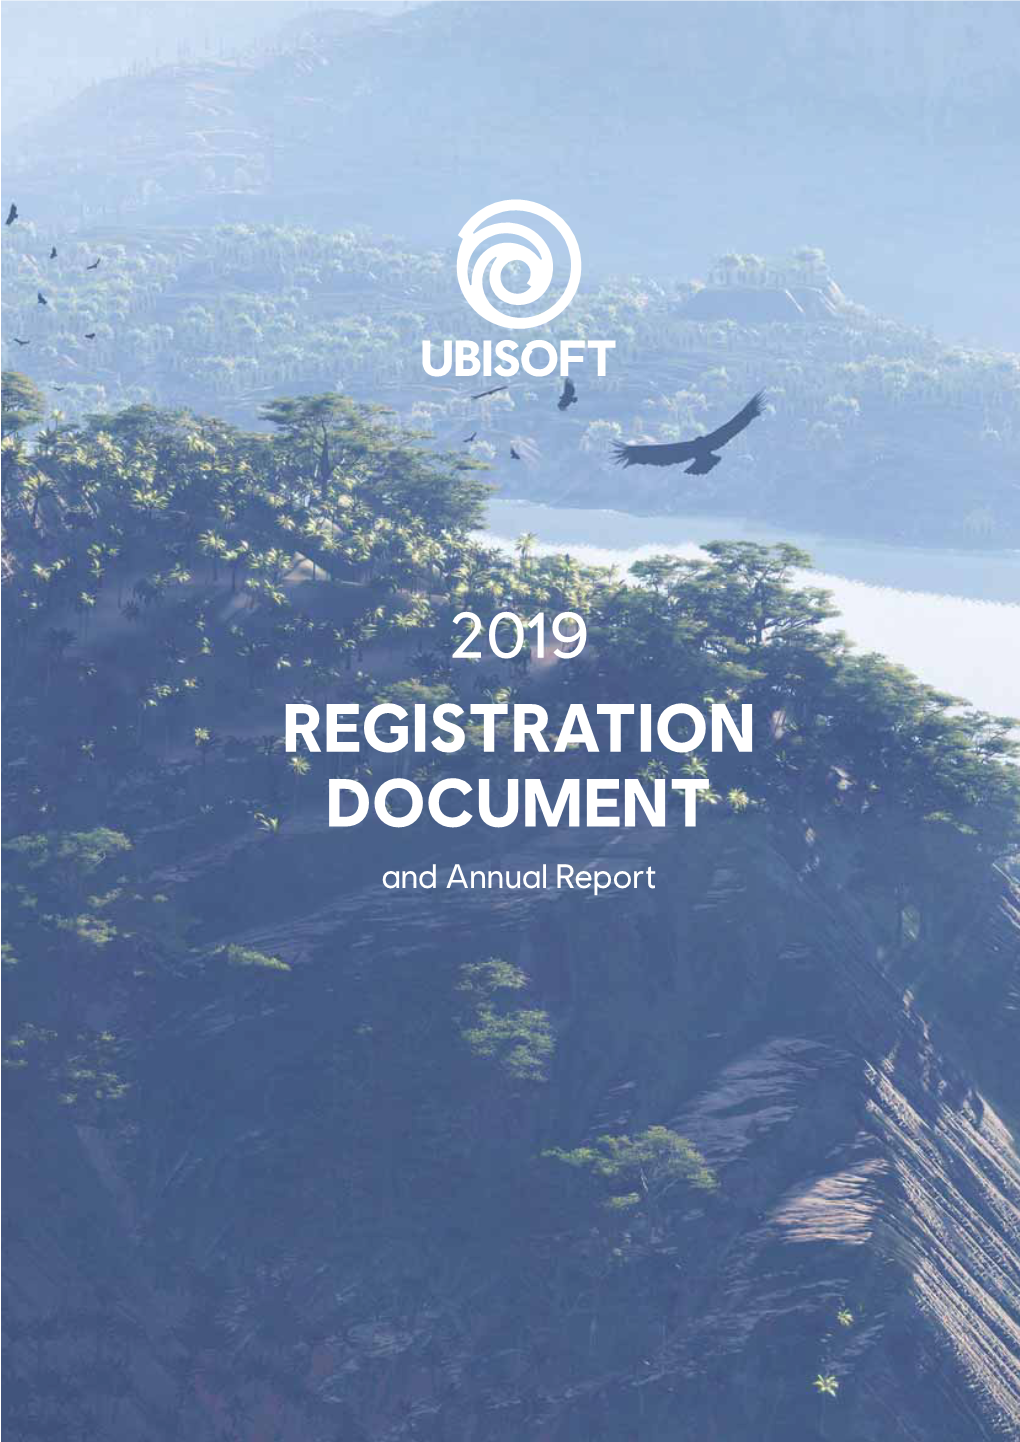 REGISTRATION DOCUMENT and Annual Report Contents